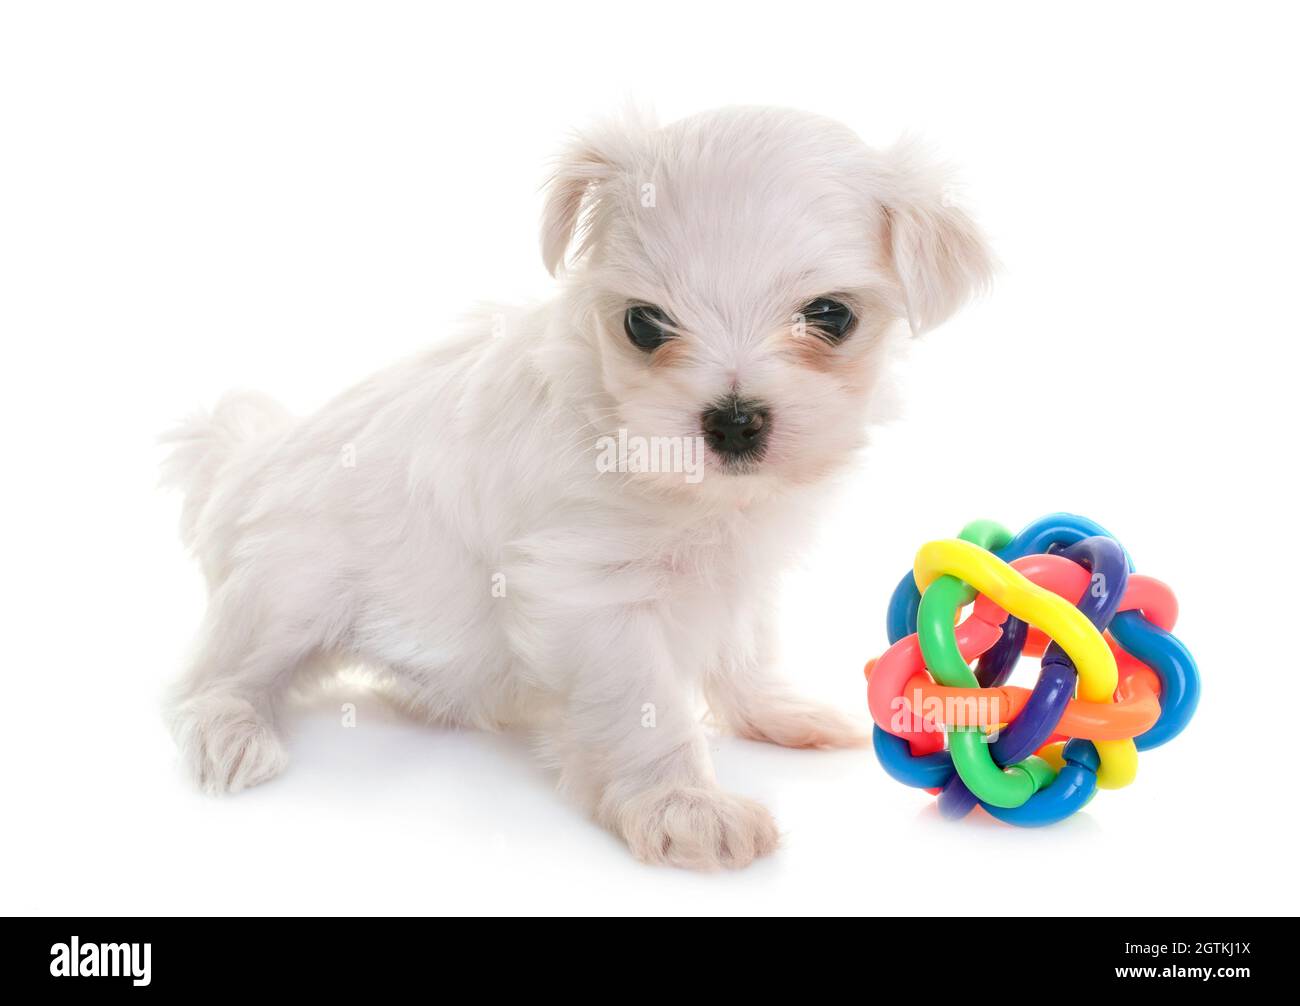 Portrait Of Cute Puppy With Colorful Toy Sitting On White Background Stock Photo